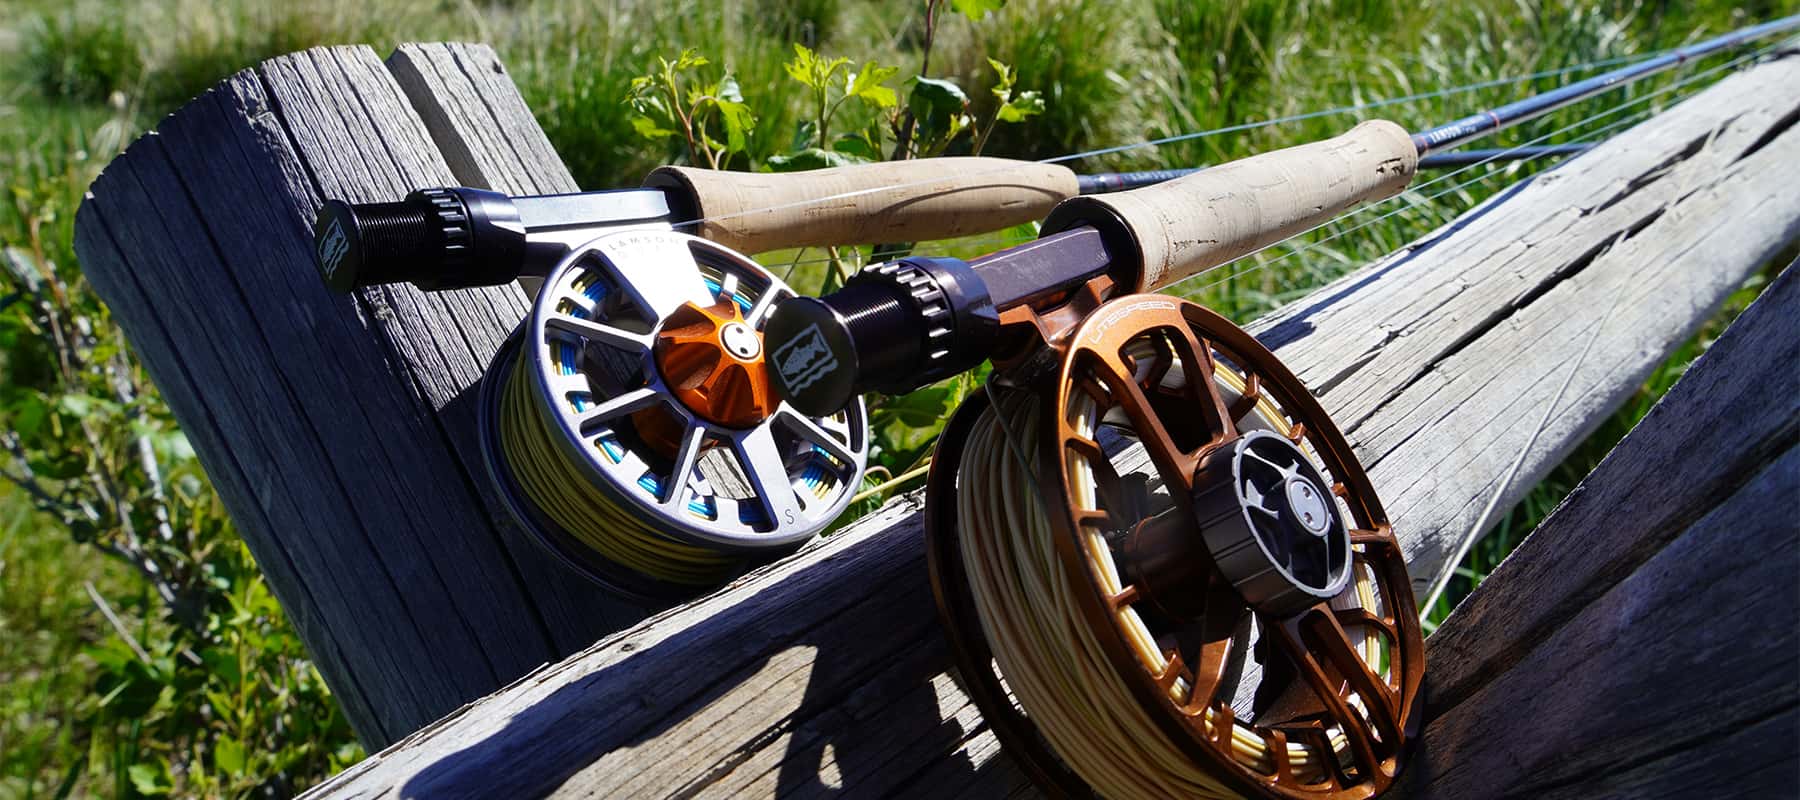 Lamson Fly Rods for Sale